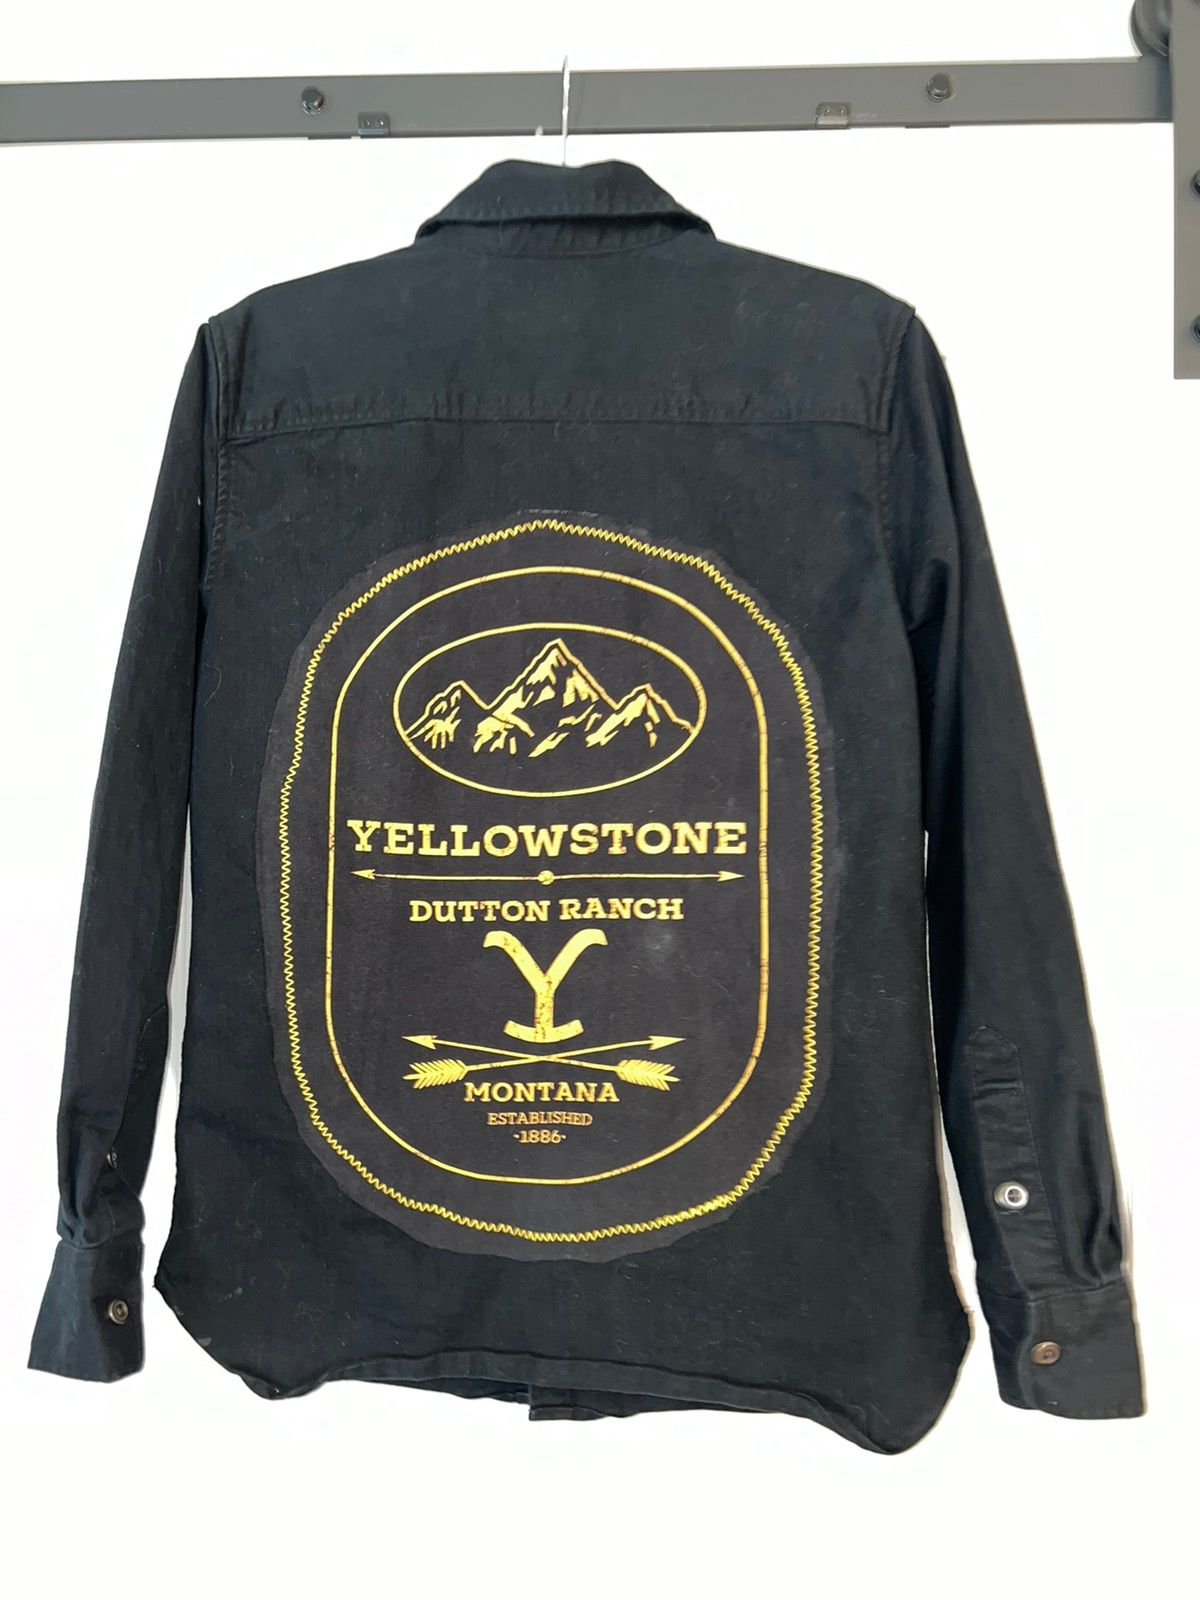 Mossimo Yellowstone TV Show Jacket Size S / US 4 / IT 40 - 1 Preview